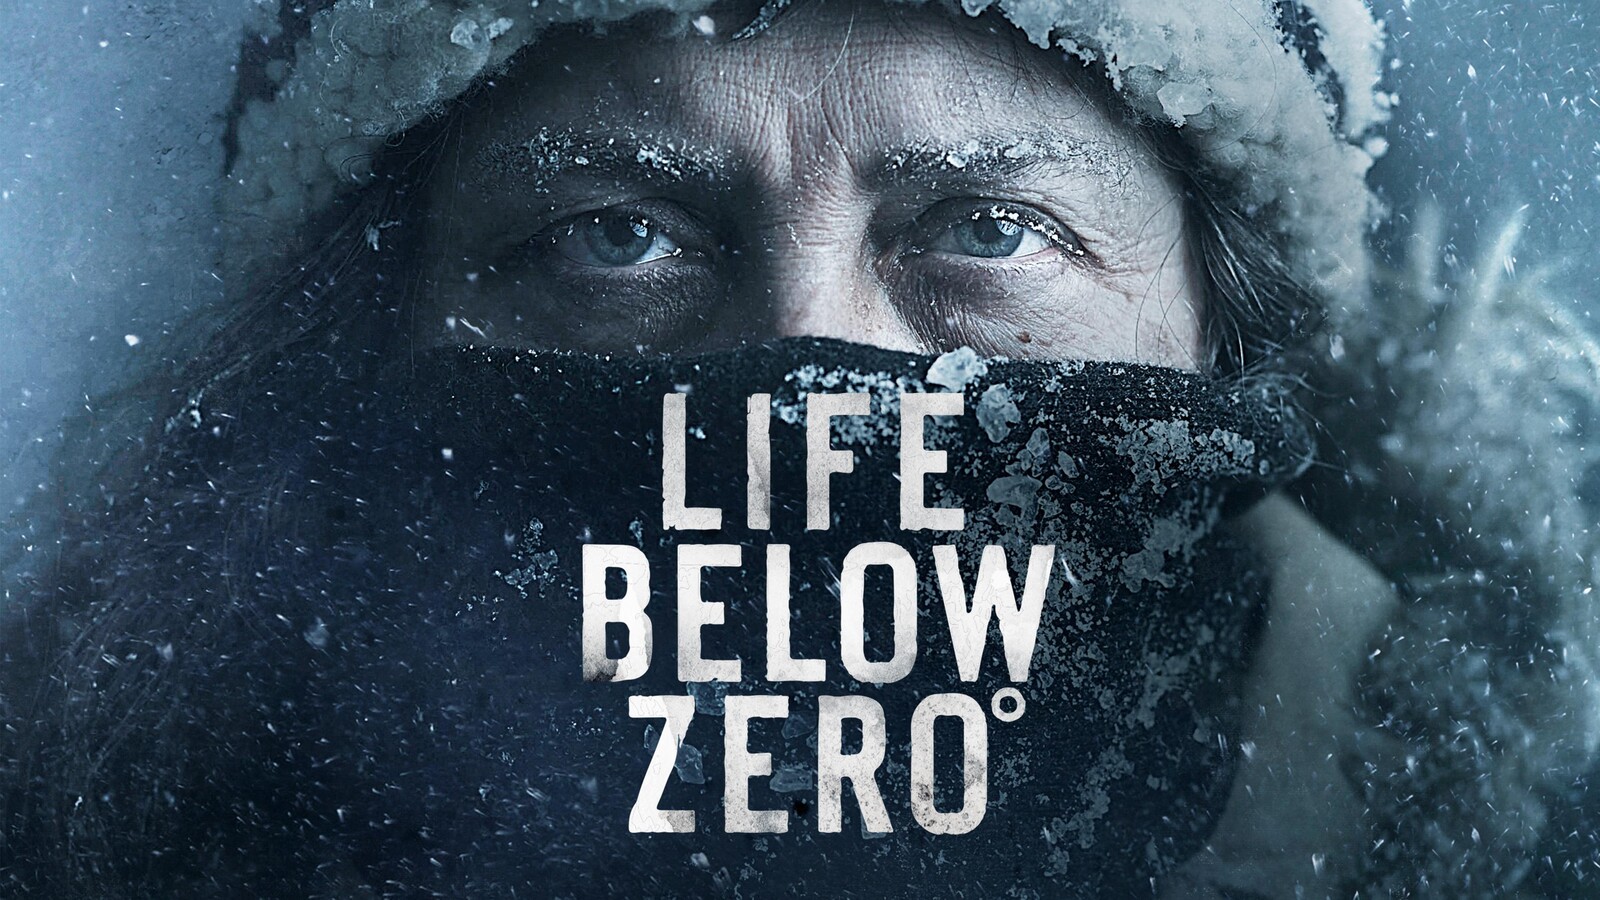 Who died on Life Below Zero?